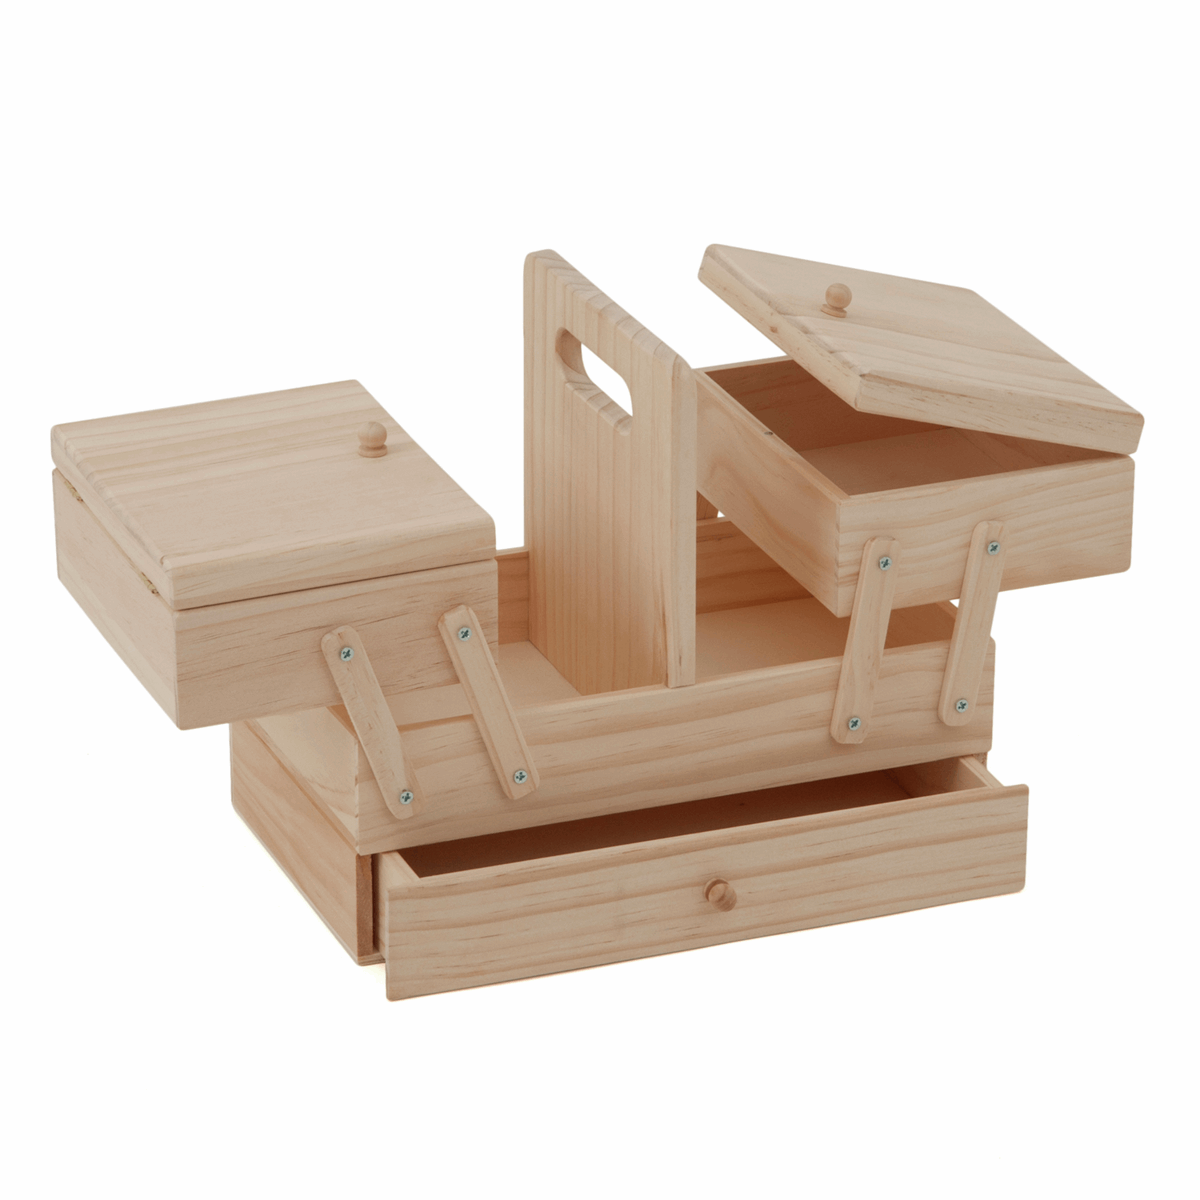 Wood Cantilever Sewing Box: 3 Tier with Drawer